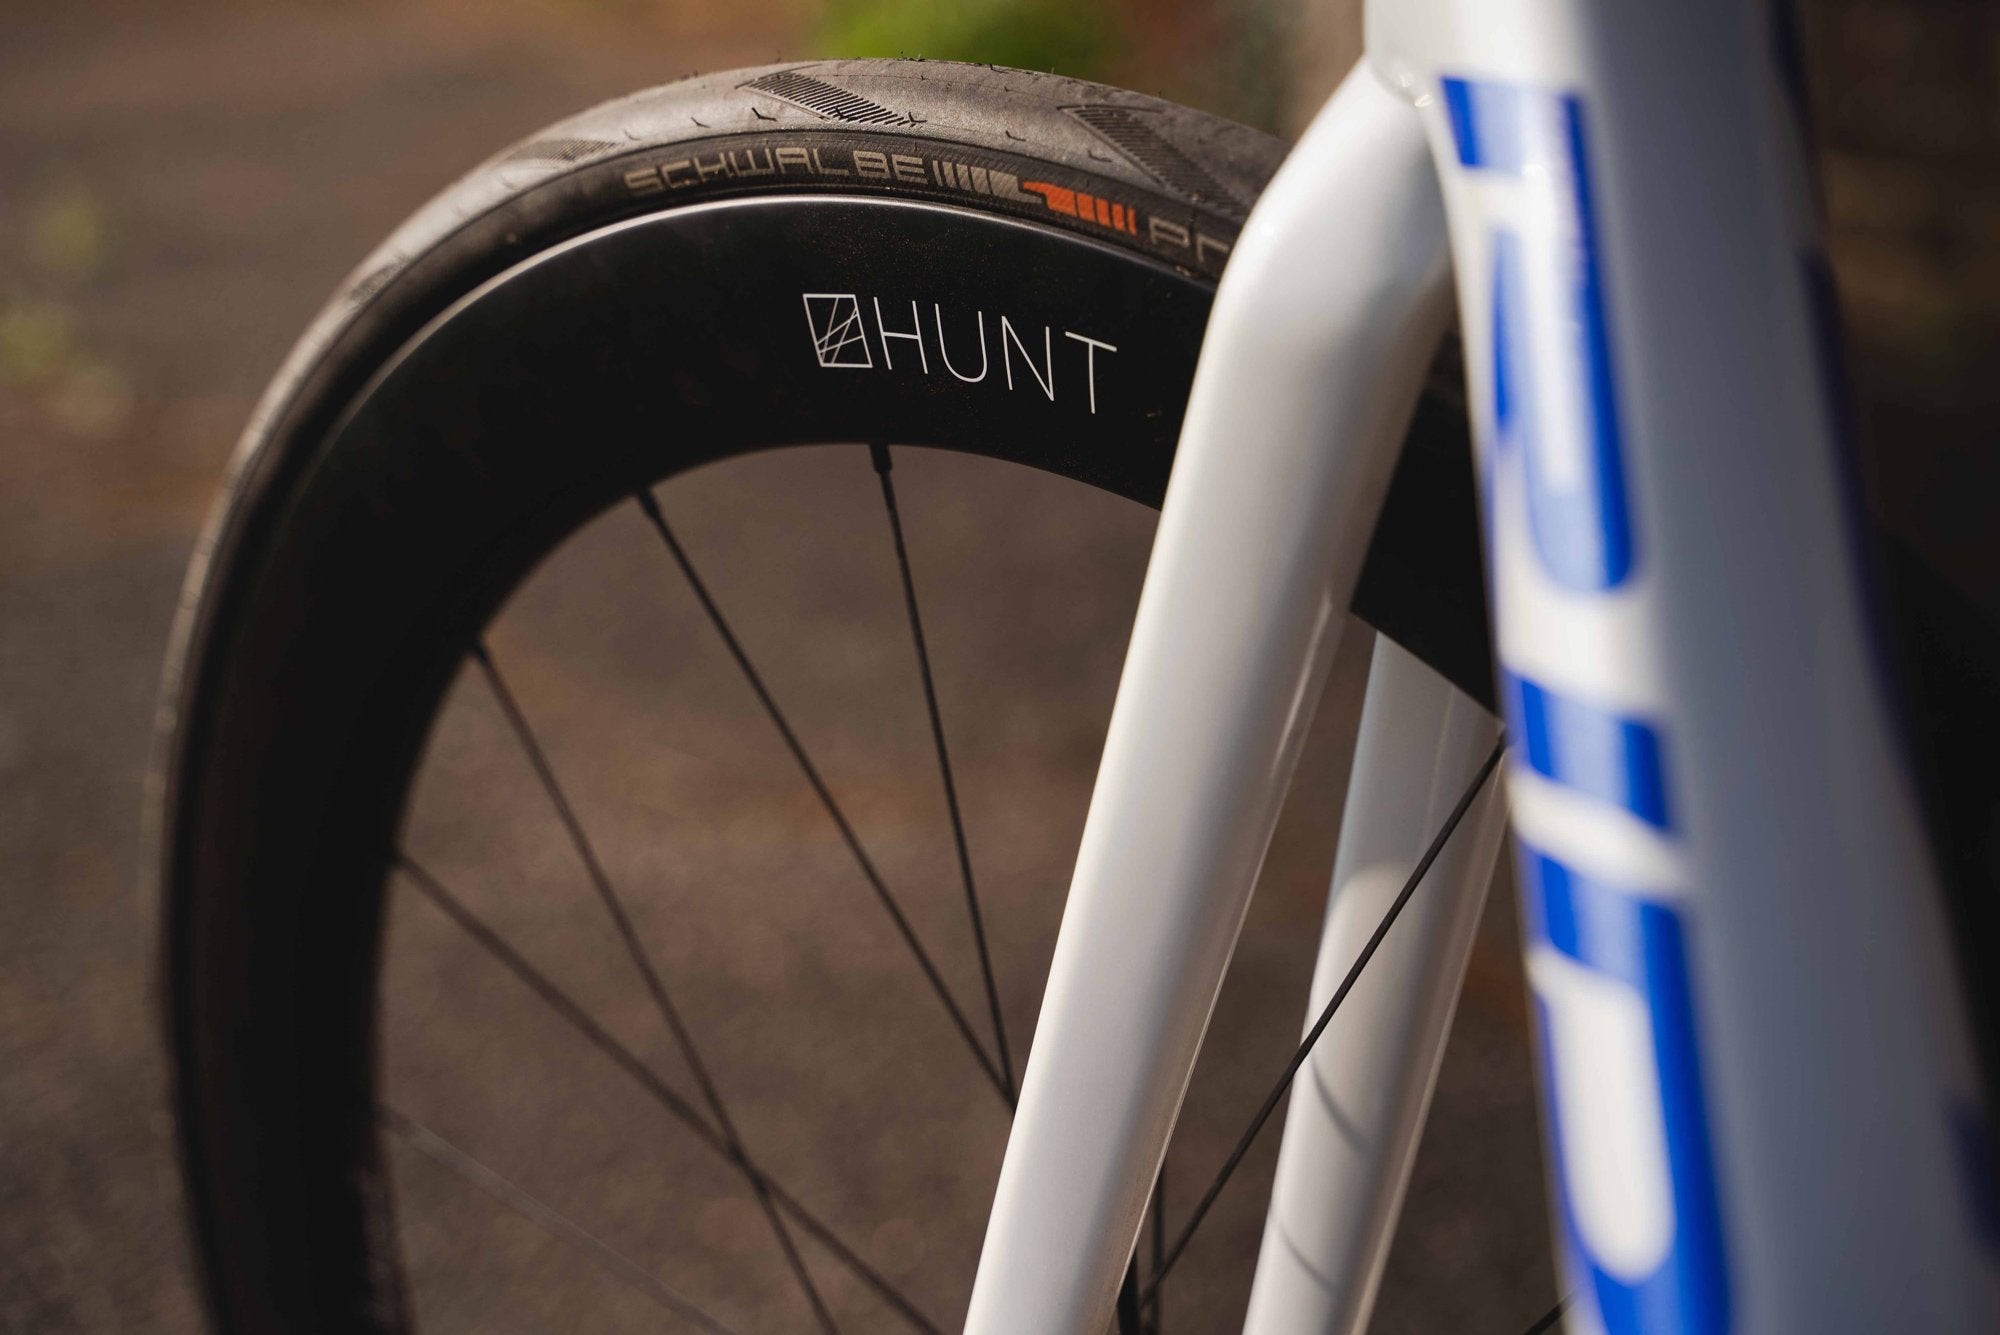 <h1>Tyre Width Optimisation</h1><i> Designed around a 20mm internal rim width optimised for a 25c tyre (but will of course work without compromise with both 23c and 28c tyres).They feature a hooked tyre retention design and are both fully ETRTO-compatible and tubeless-ready.</i>